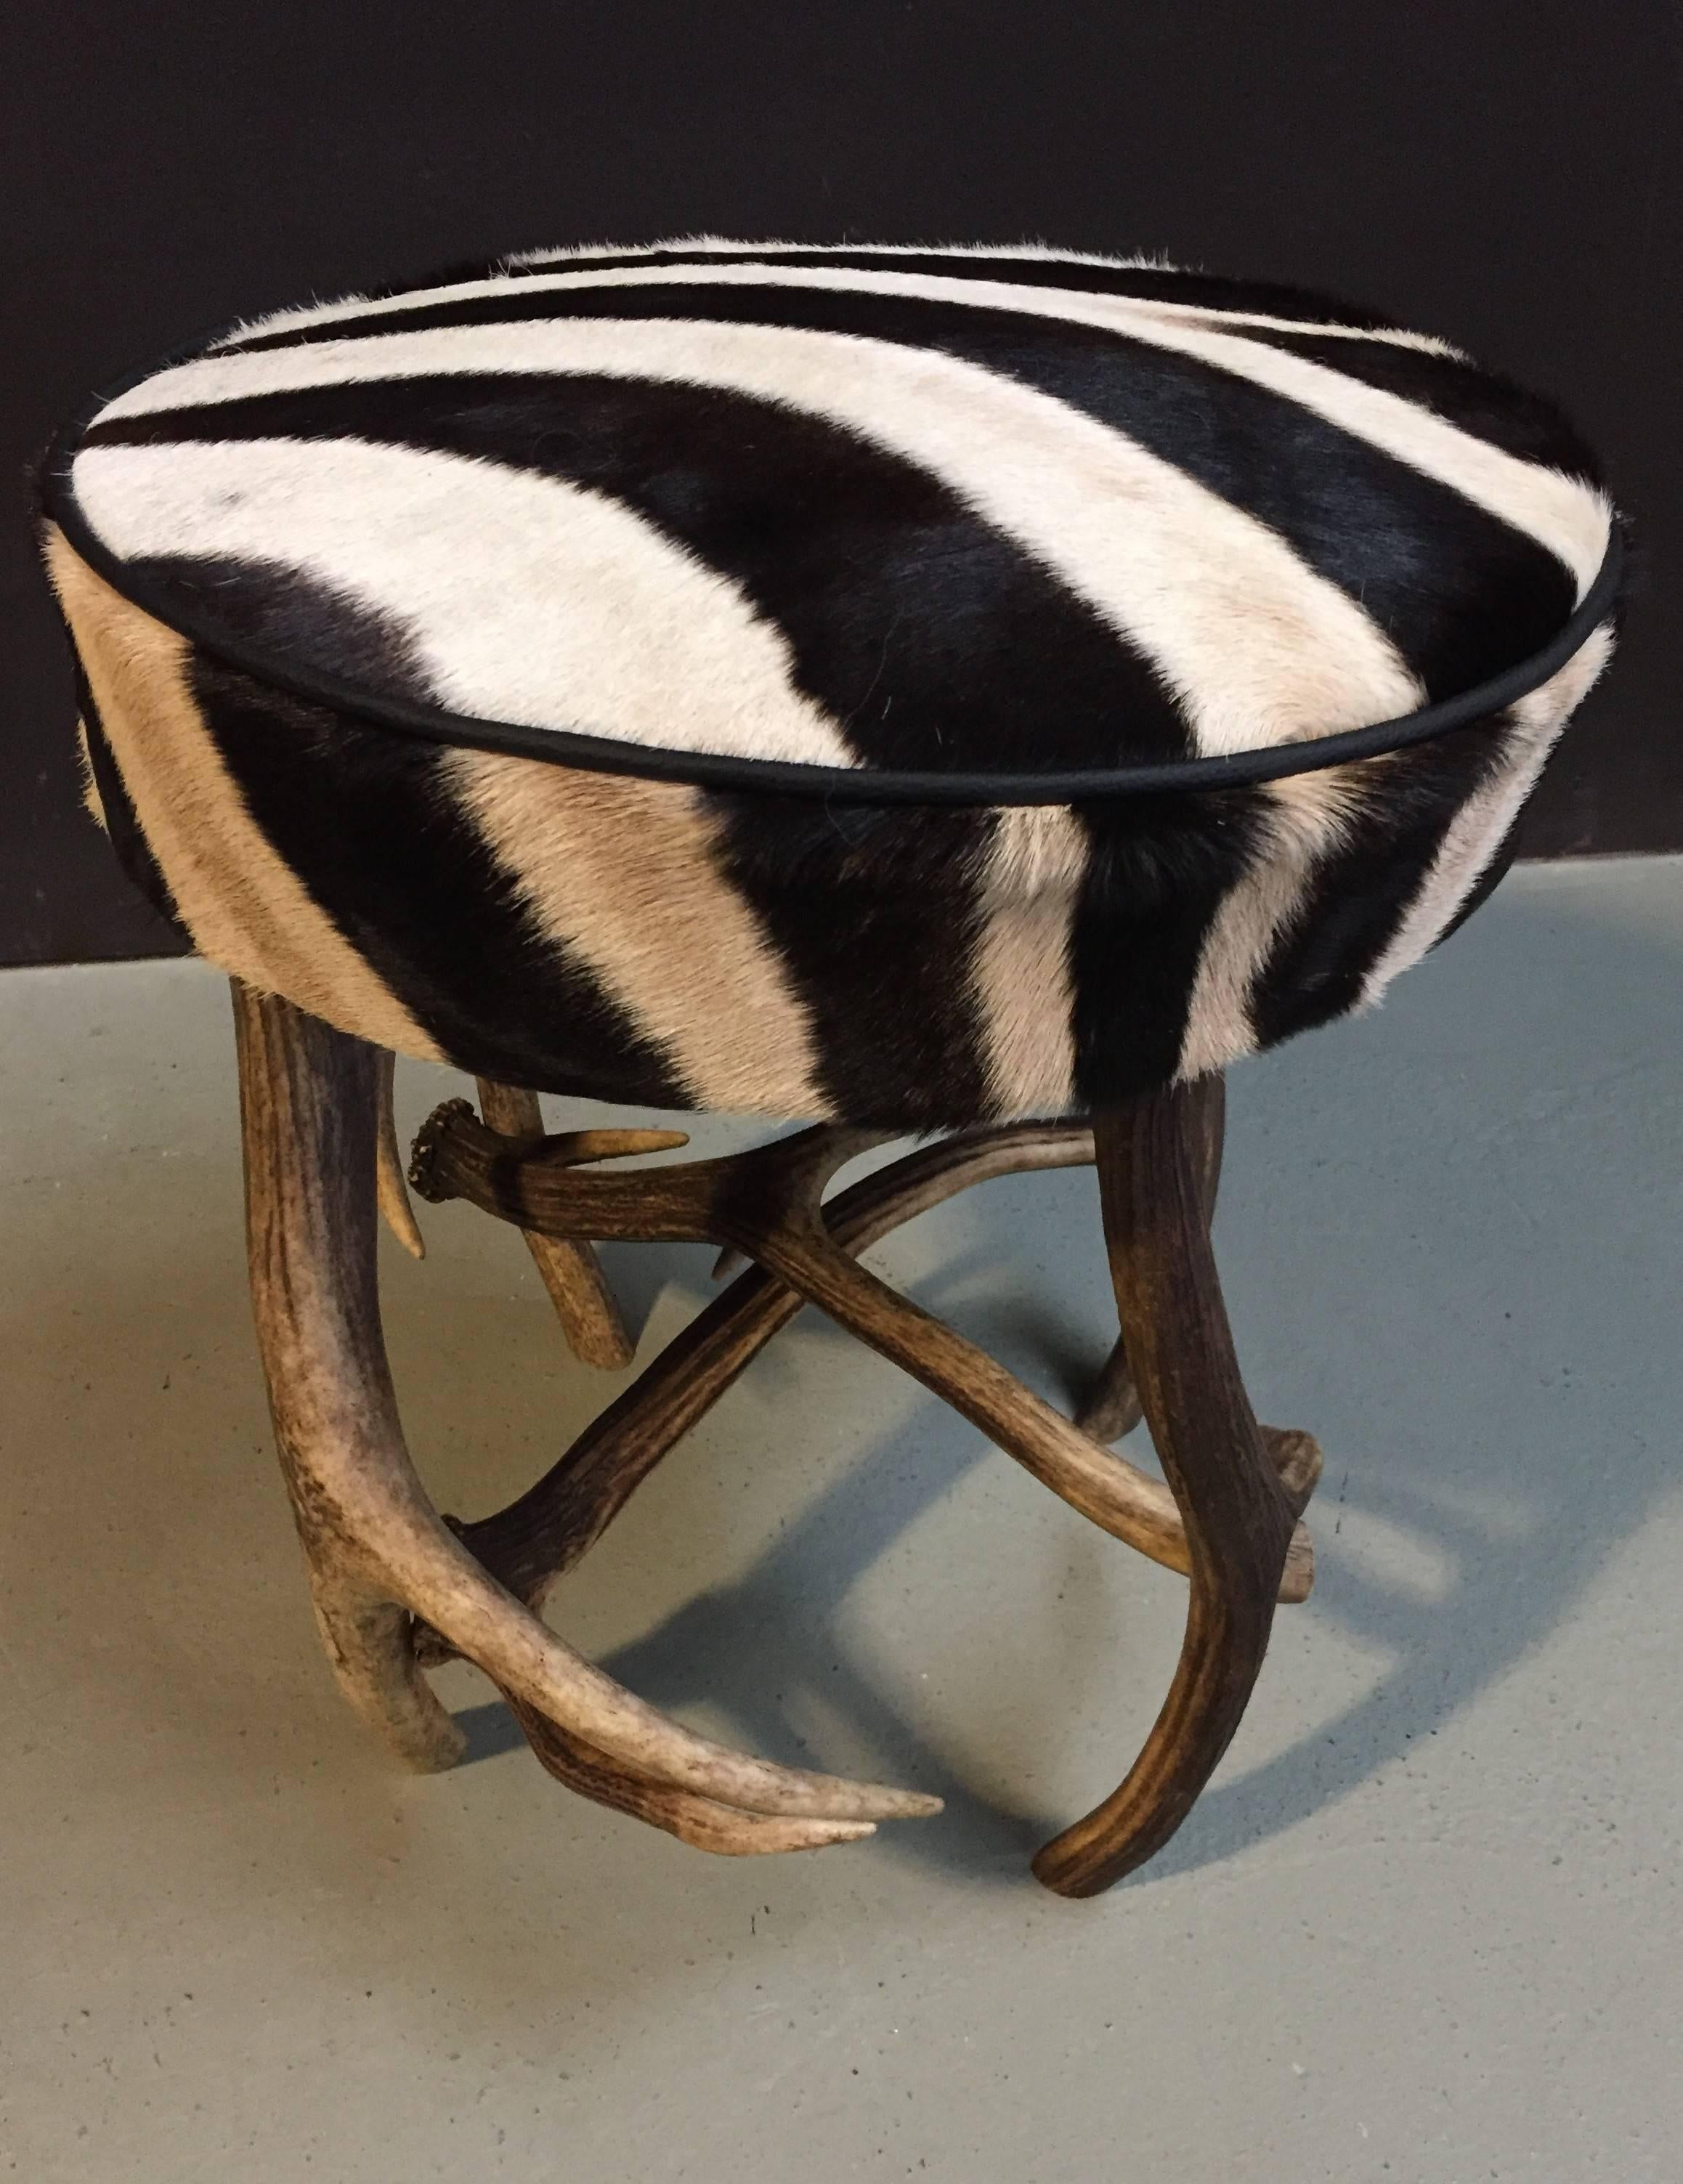 Antler stool made of red deer antlers with a zebra skin top.